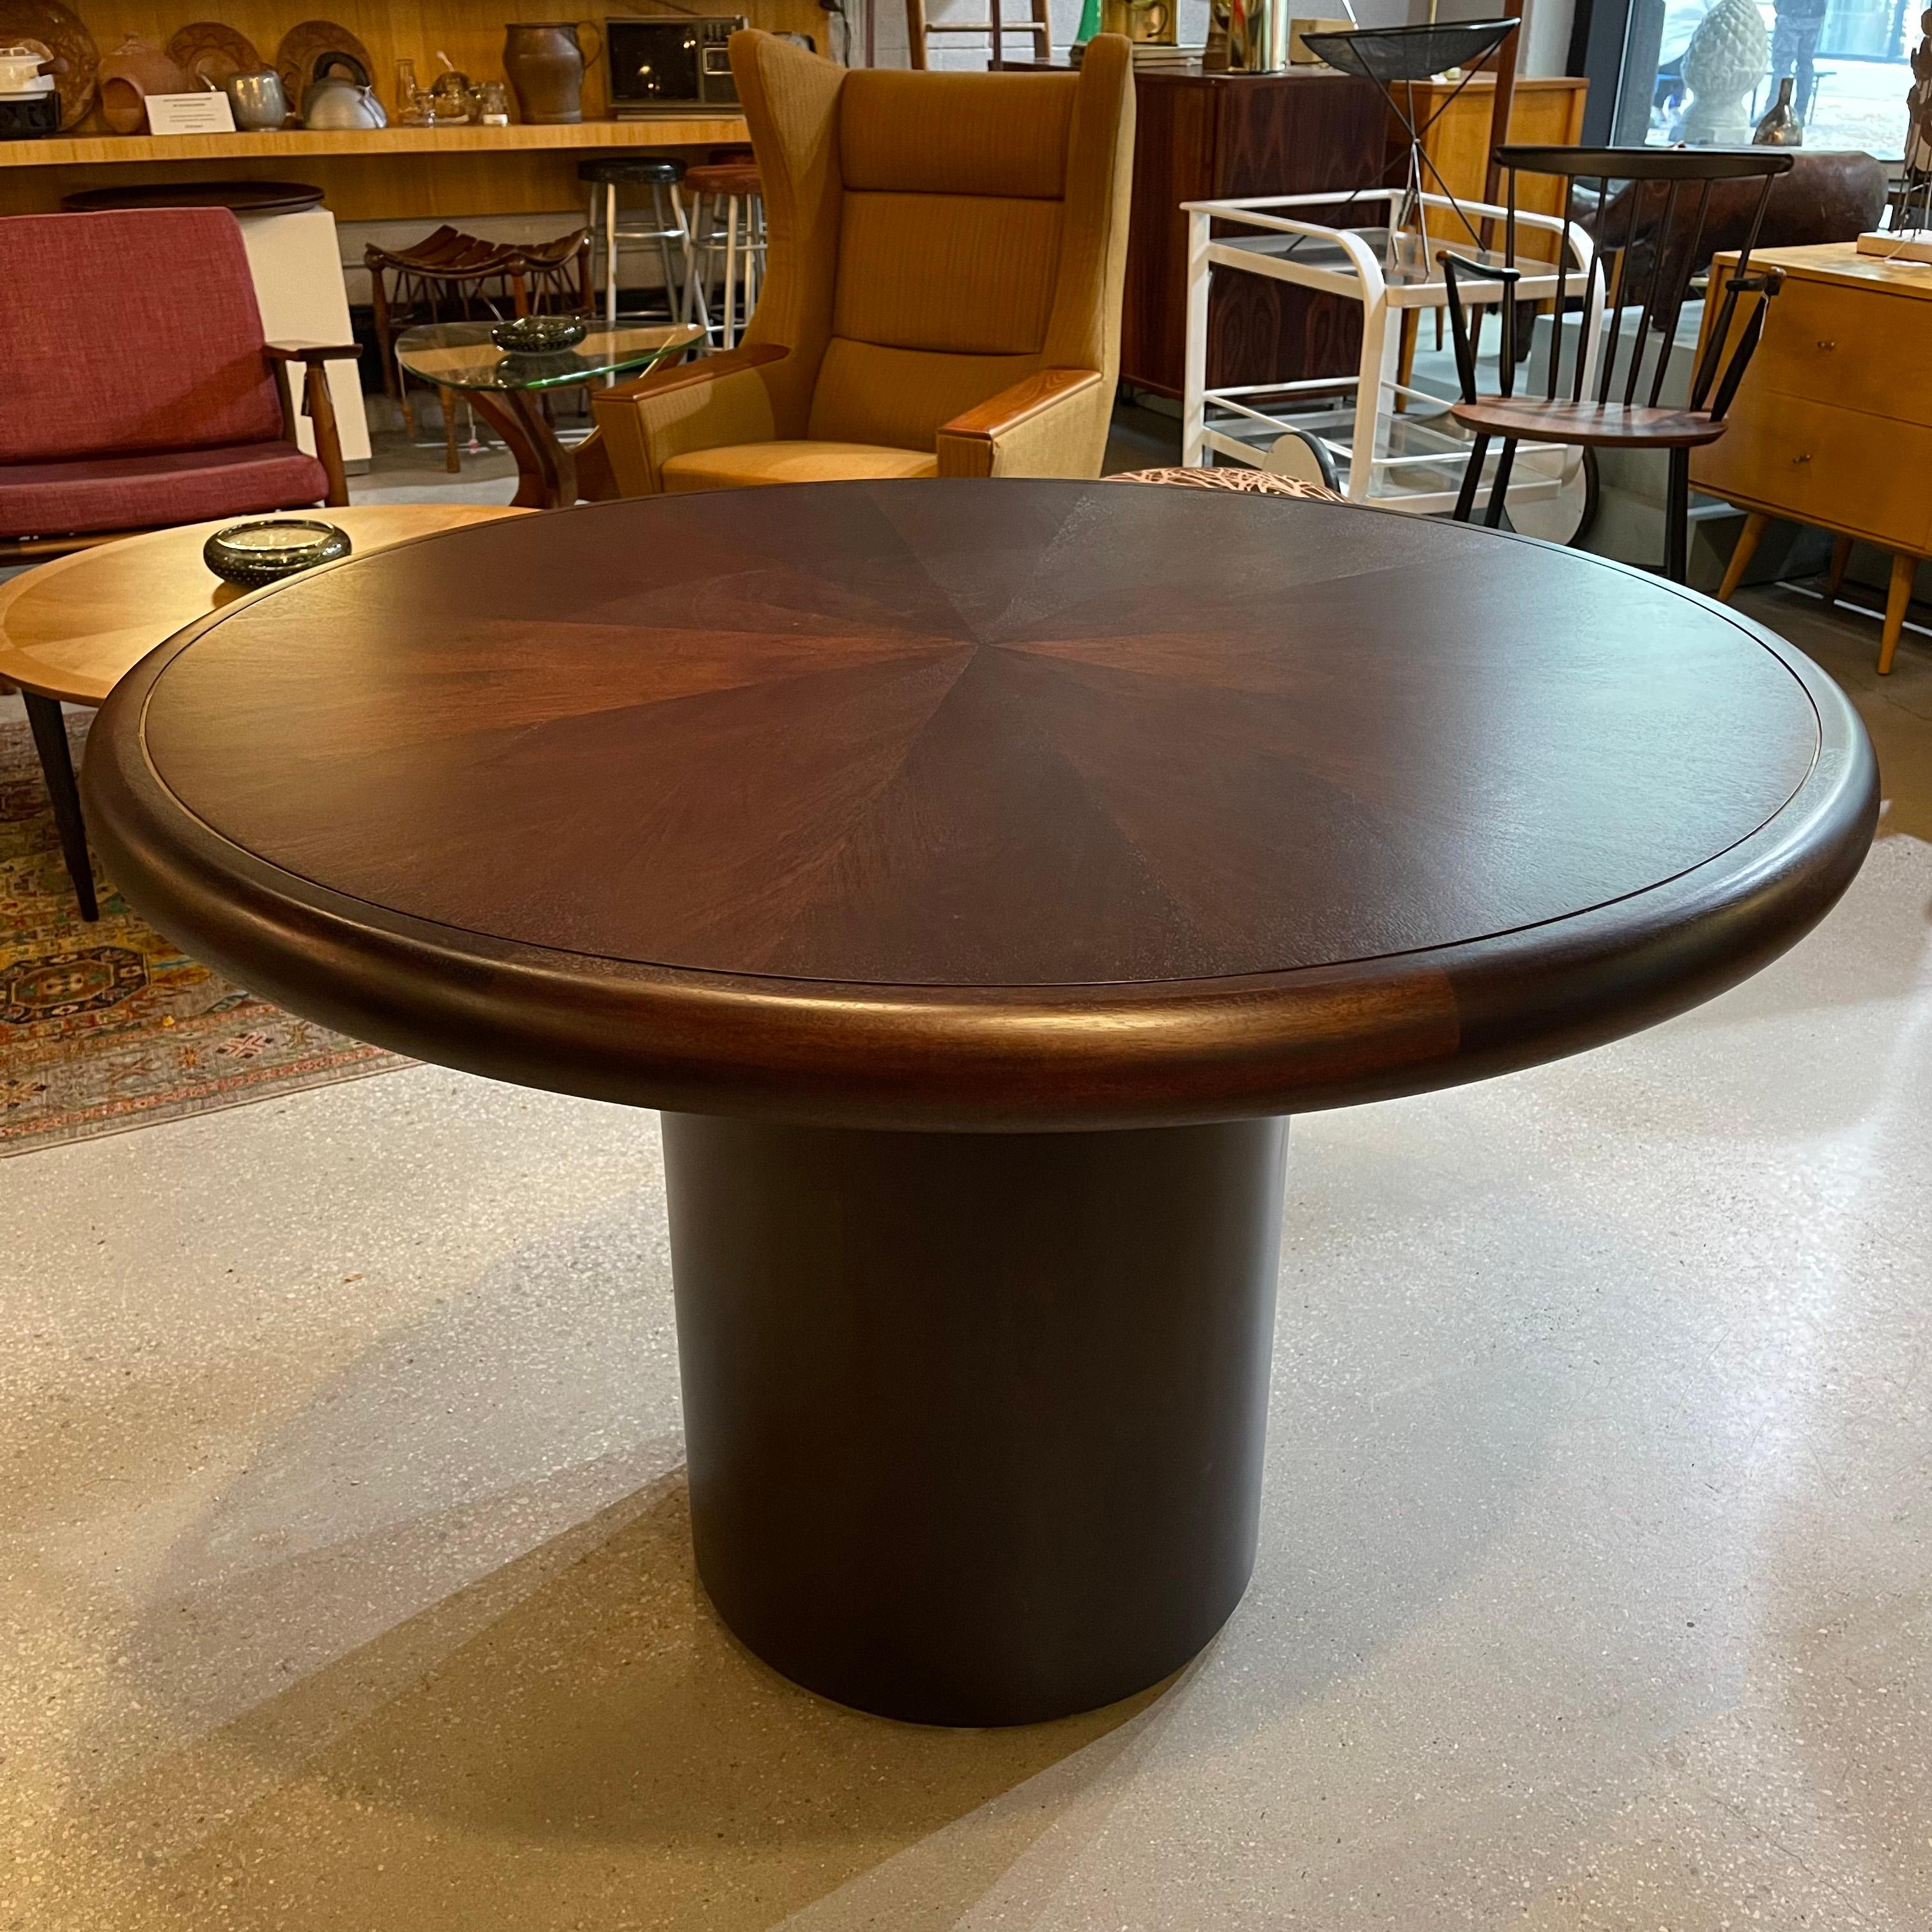 20th Century Round Bookmatched Rosewood Pedestal Dining Table By Edward Wormley For Dunbar For Sale